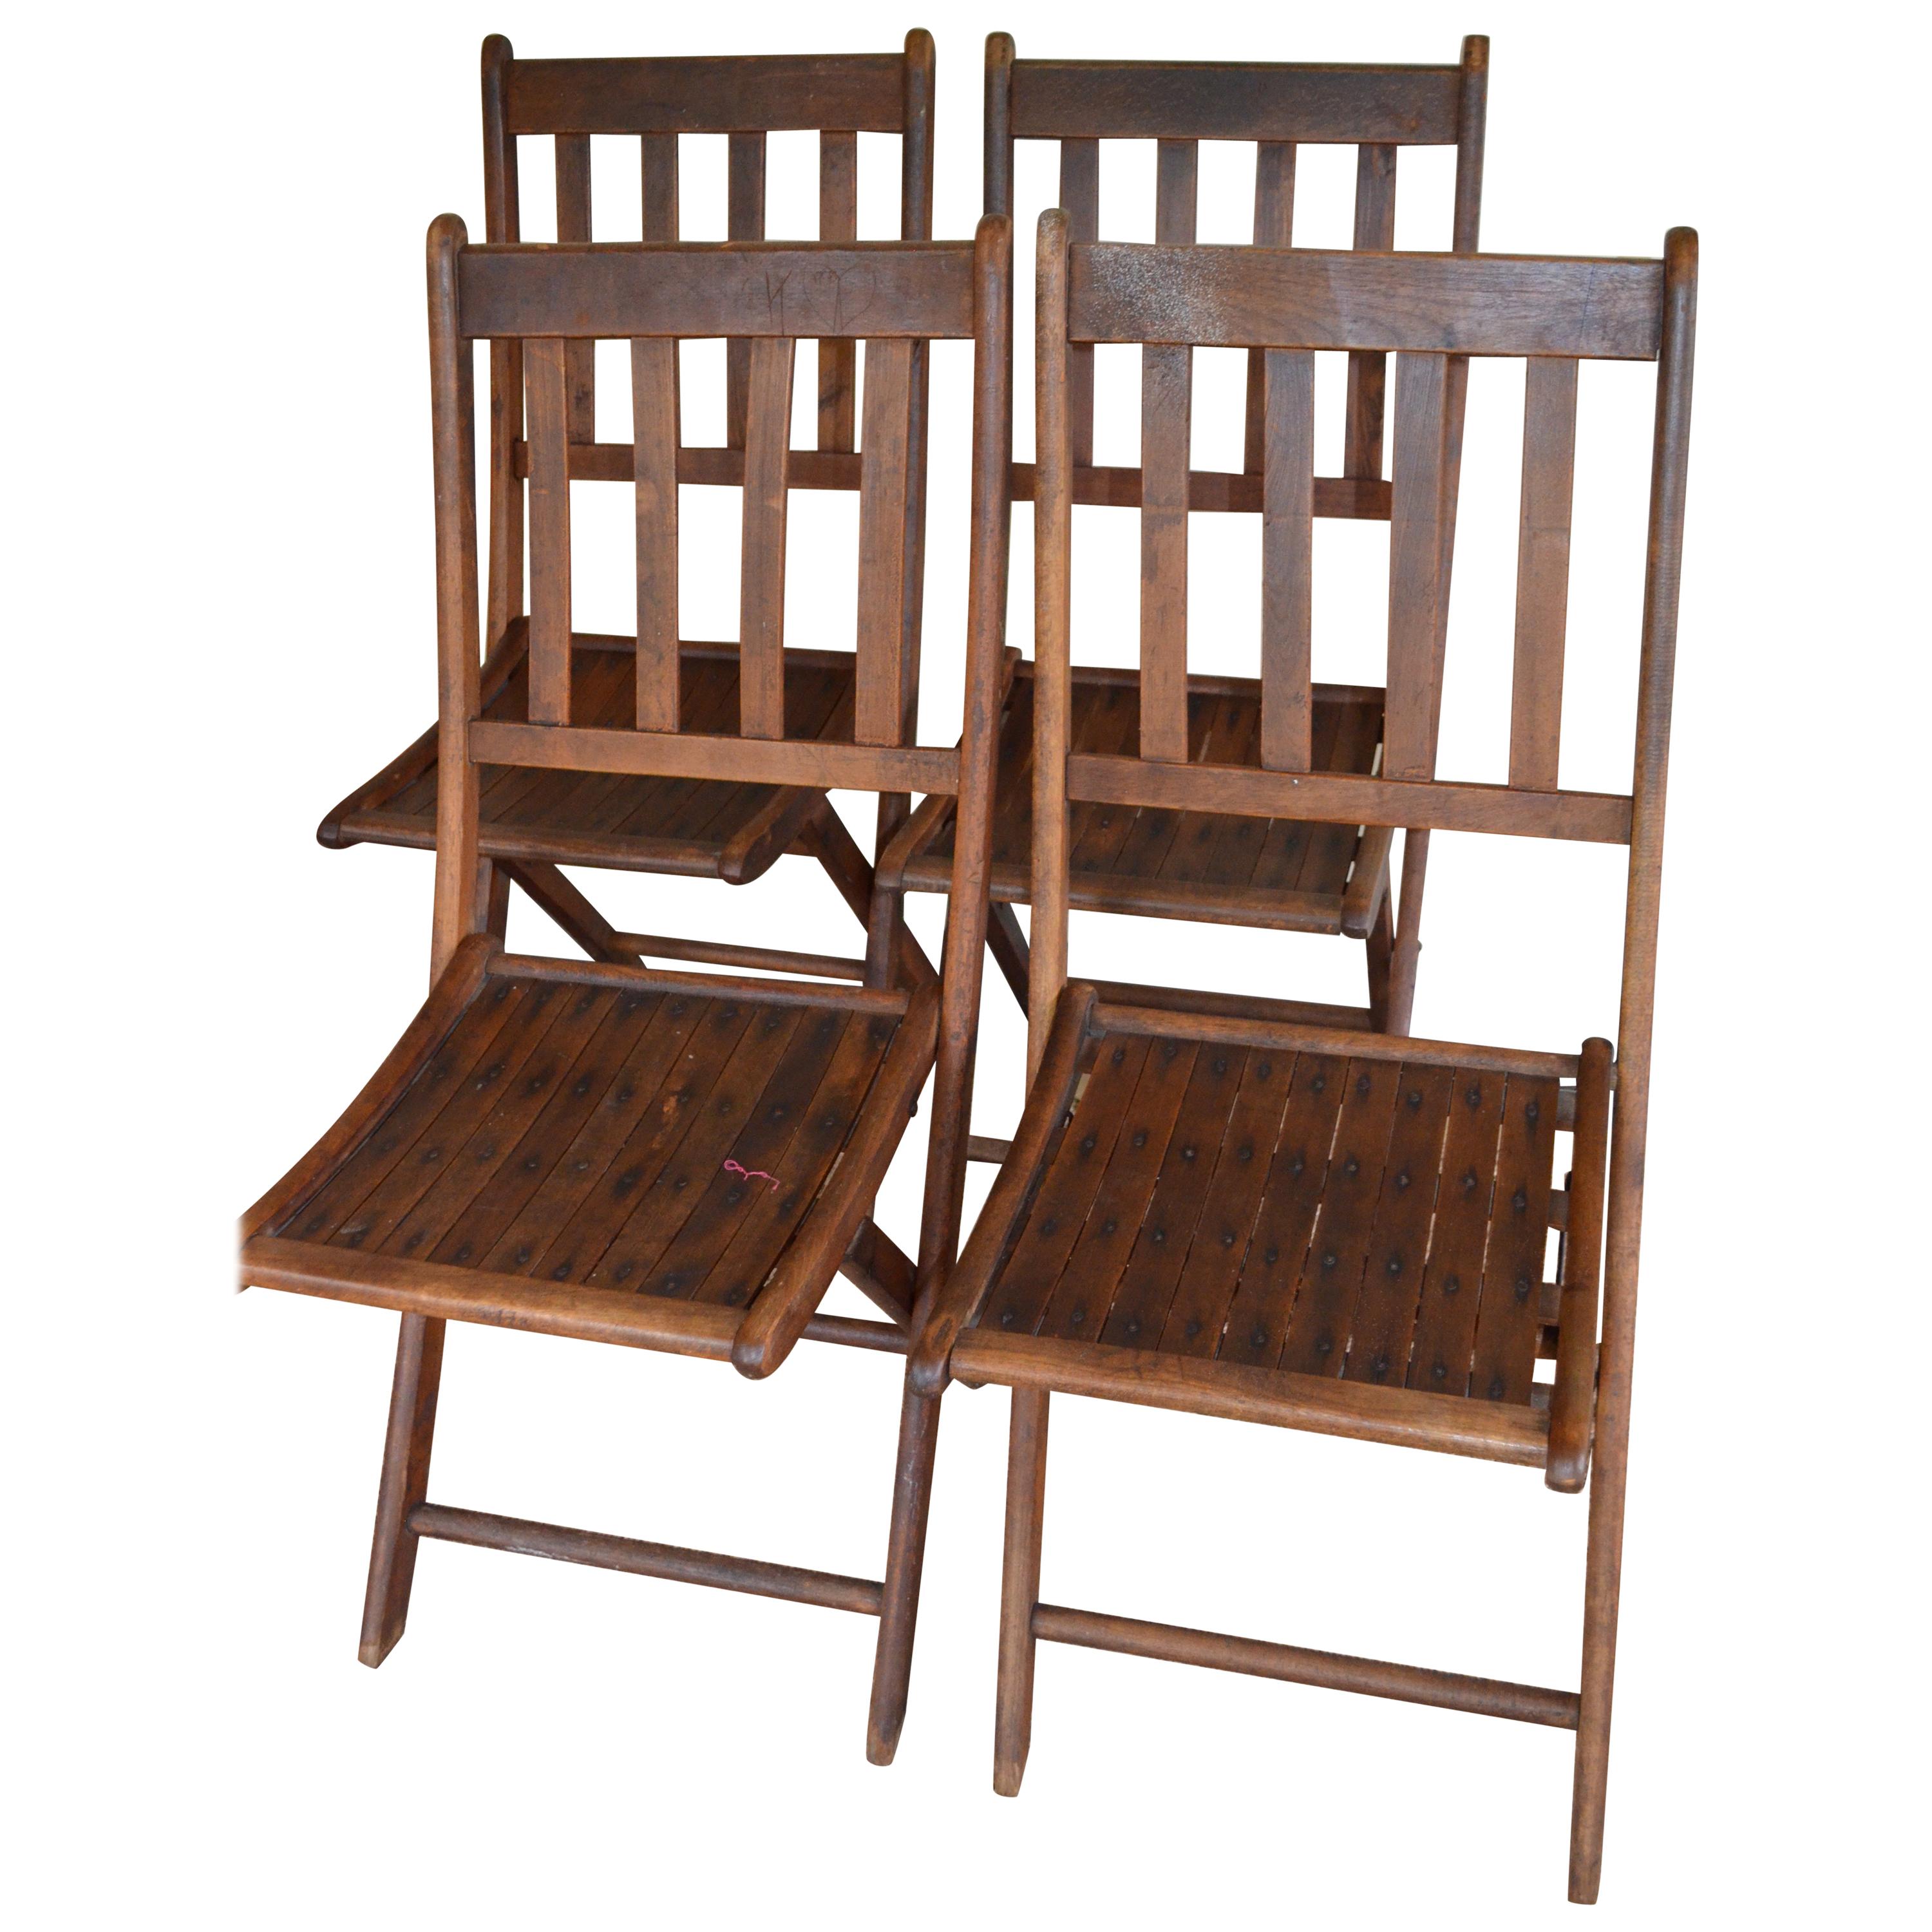 Chairs of Oak, Folding, Late 19th Century European, Set of 4, Multiple Sets For Sale